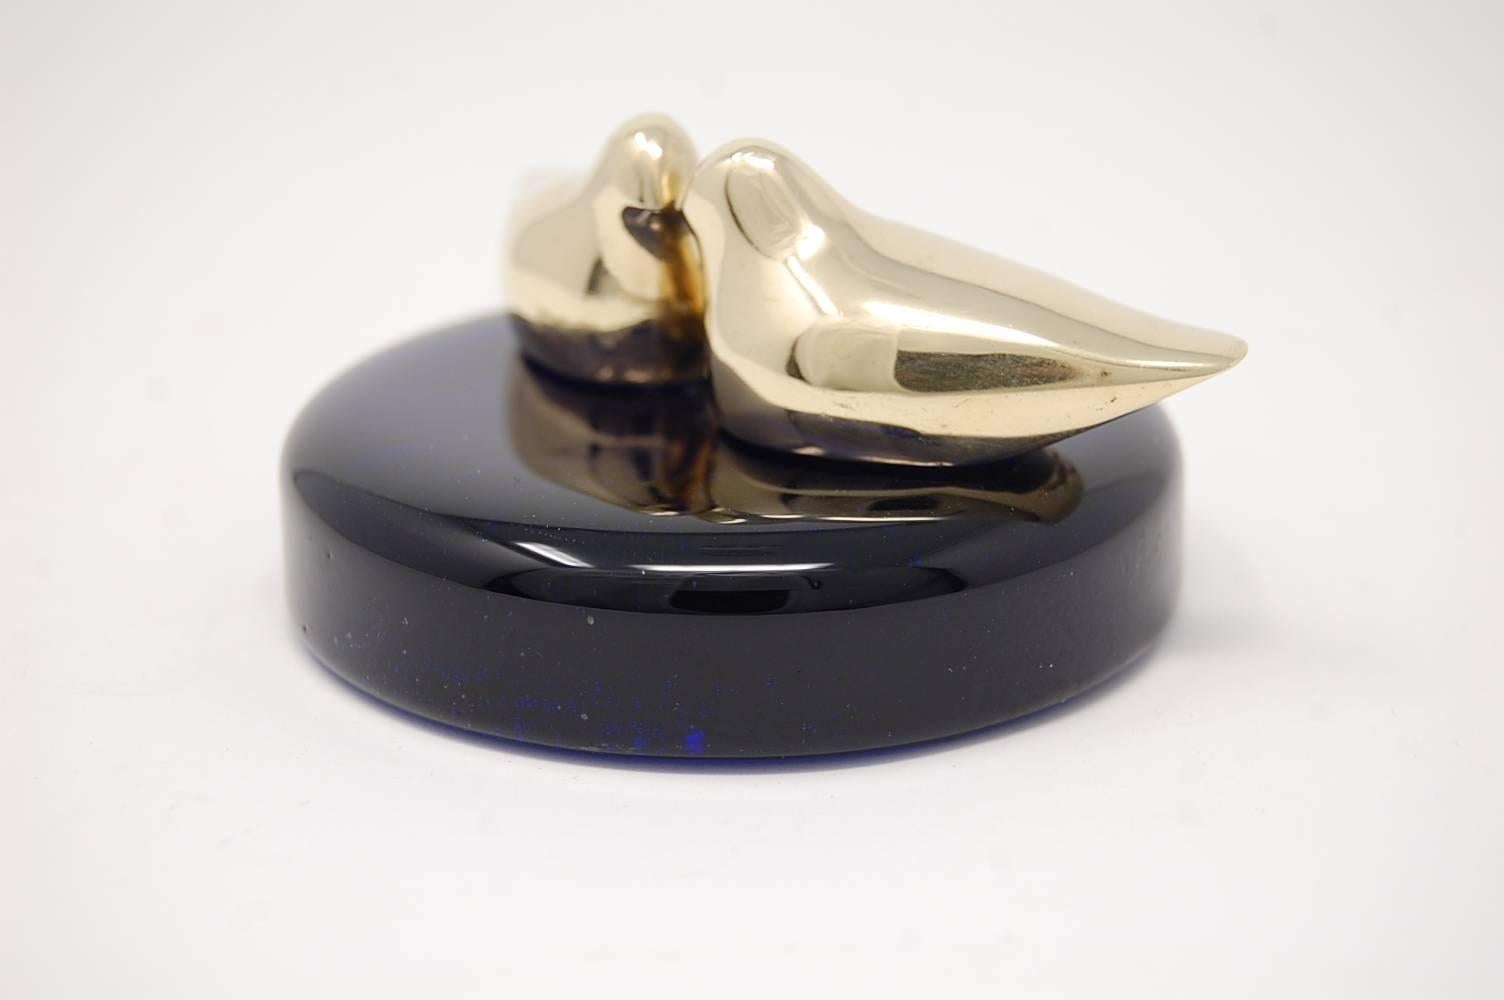 Paperweight of cobalt blue glass, and pair of bronze birds, attributed to Tapio Wirkkala for Kultakeskus Oy, circa 1968, Finland.

We offer free delivery on most of our items within the Long Island or greater NYC, Northern New Jersey, and all of